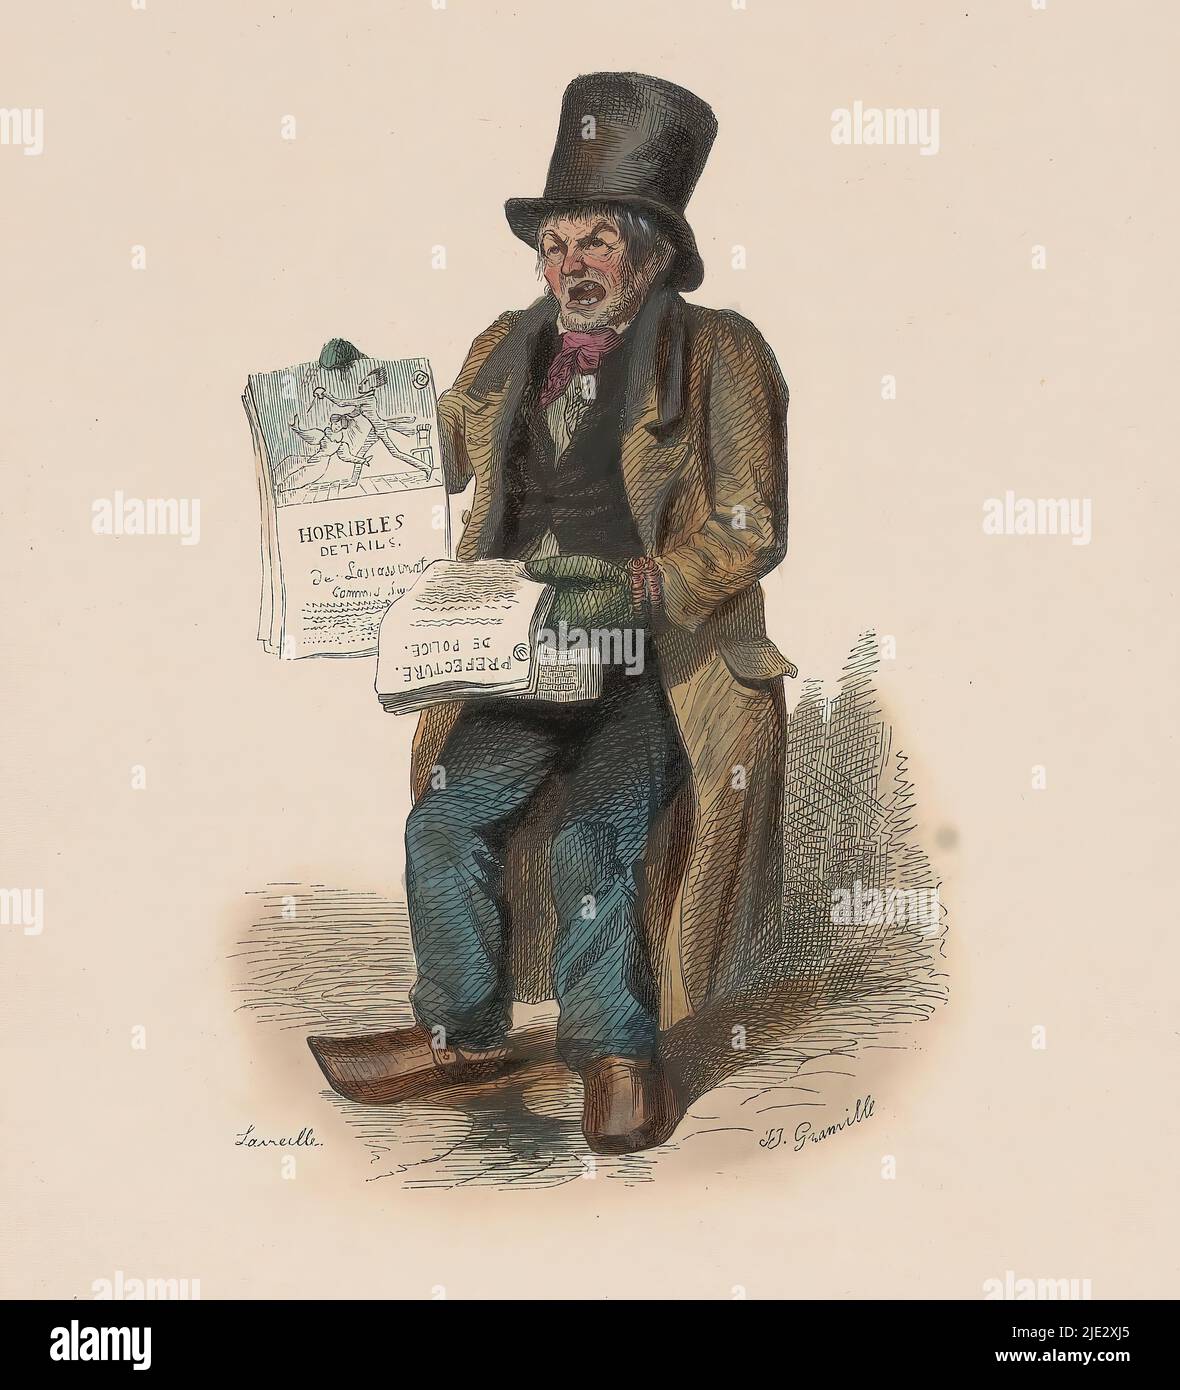 Newspaper Seller, On the street stands a man wearing a top hat and a long coat. In his hands he holds several newspapers or magazines., print maker: Laireille, (mentioned on object), after design by: Jean Ignace Isidore Gérard Grandville, (mentioned on object), c. 1825 - c. 1875, paper, height 242 mm × width 159 mm Stock Photo